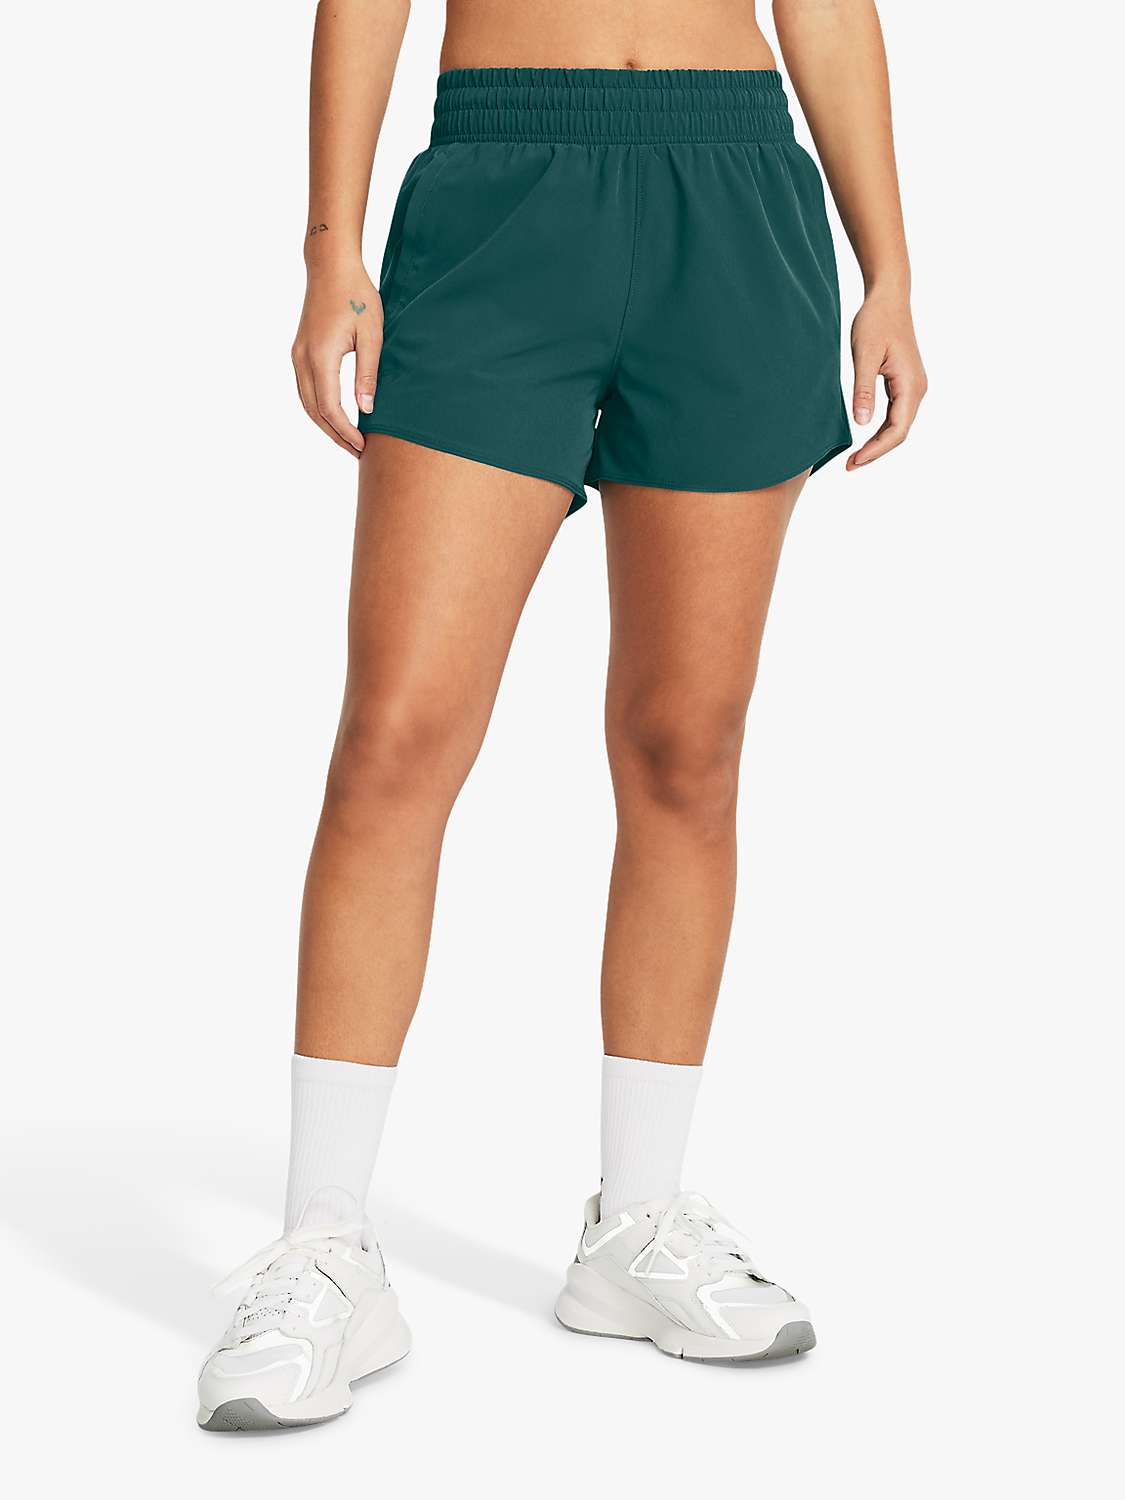 Buy Under Armour Flex Woven 3" Running Shorts, Hydro Teal Online at johnlewis.com